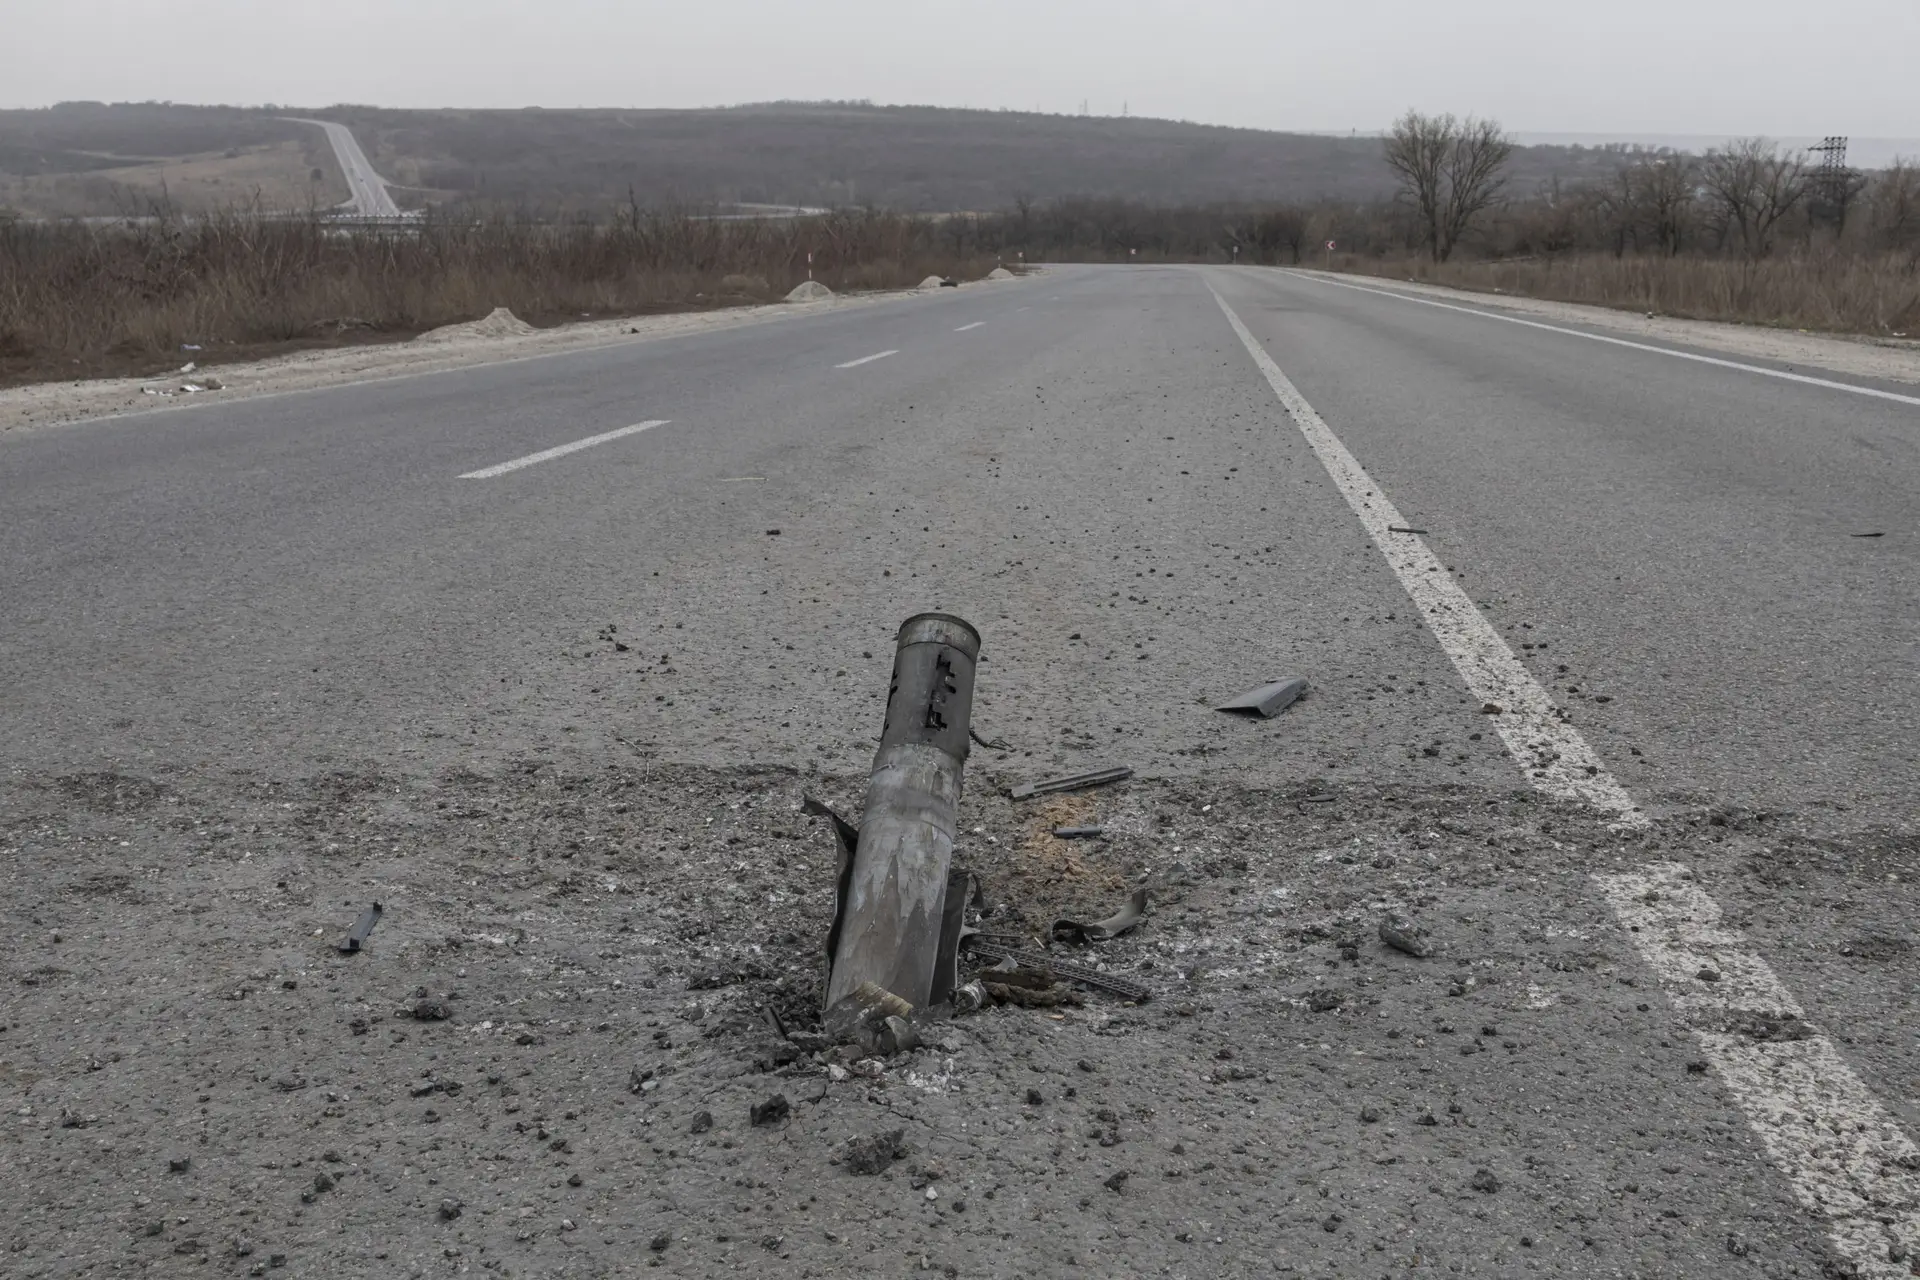 Remains of the Grad rocket are seen on a road near the village of Kamyanske, as Russia’s invasion of Ukraine continues, outside the town of Zaporizhzhia, Ukraine, April 2, 2022. REUTERS/Marko Djurica